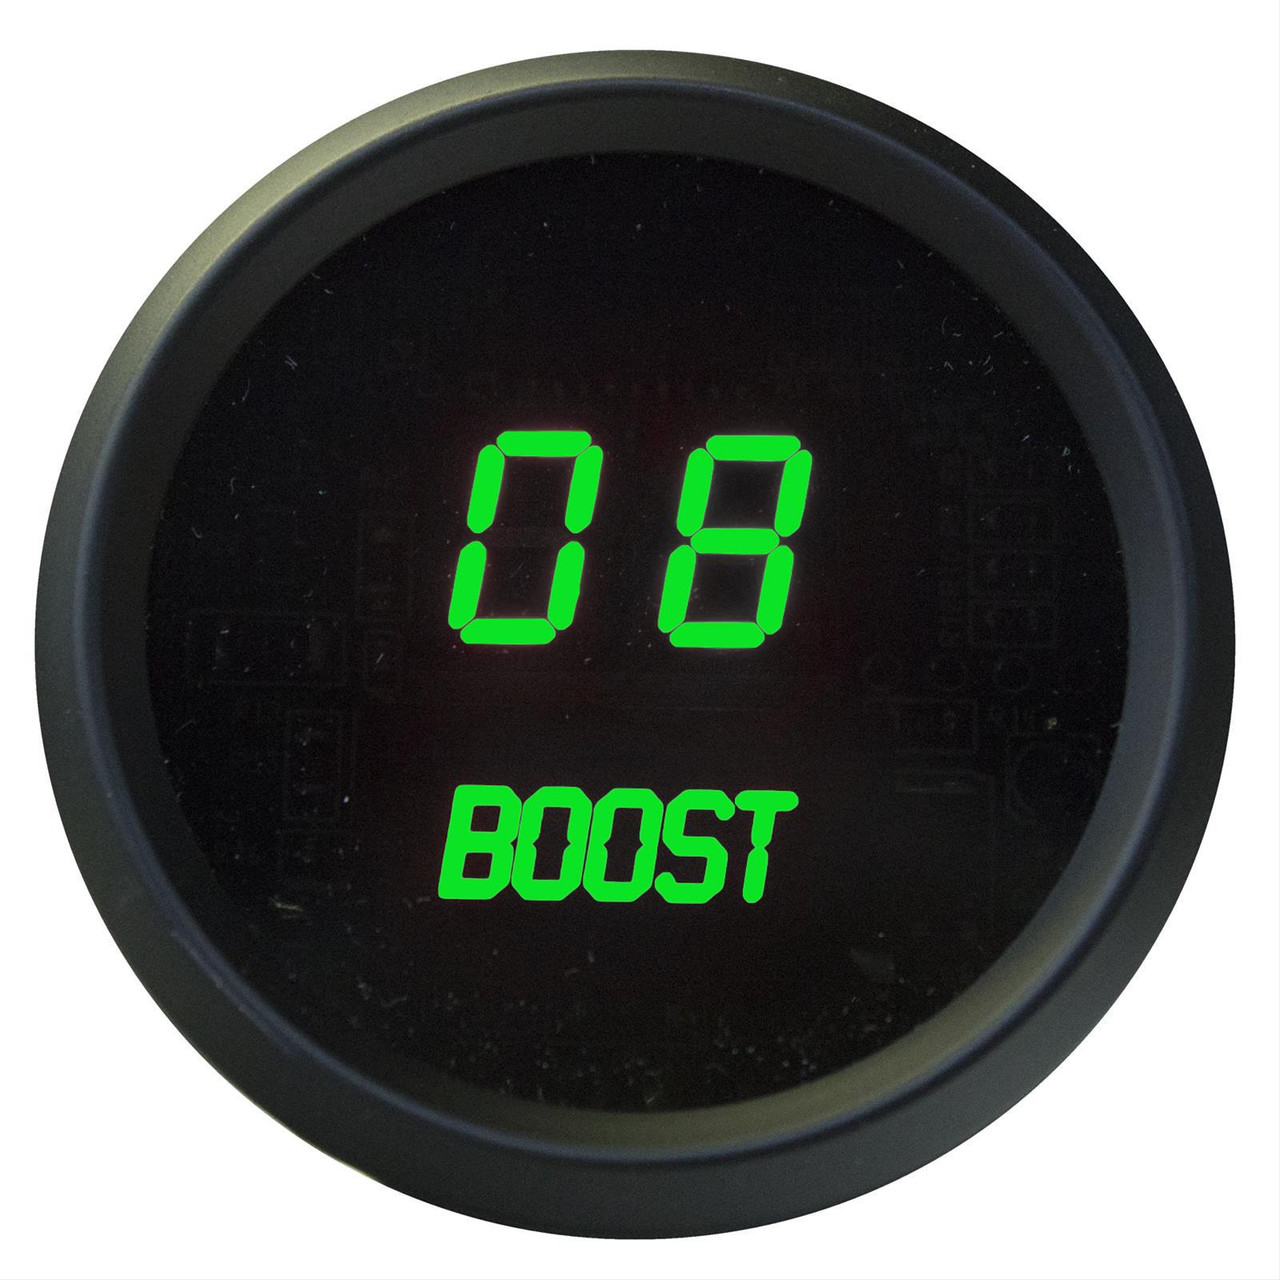 Boost LED Digital Chrome Bezel - MS9011
Measure boost pressure with this bright LED Digital Boost pressure gauge from Intellitronix. The digital Boost gauges with LED technology is microprocessor-controlled with 0 to 30 PSI accuracy and works with any vehicle. The gauge has precision accuracy and easy viewing in sunlight. Our Digits are 33% Larger than any other Digital Boost Gauge on the market, guaranteed! Better precision and better visibility than you can buy with any other manufacturer!
